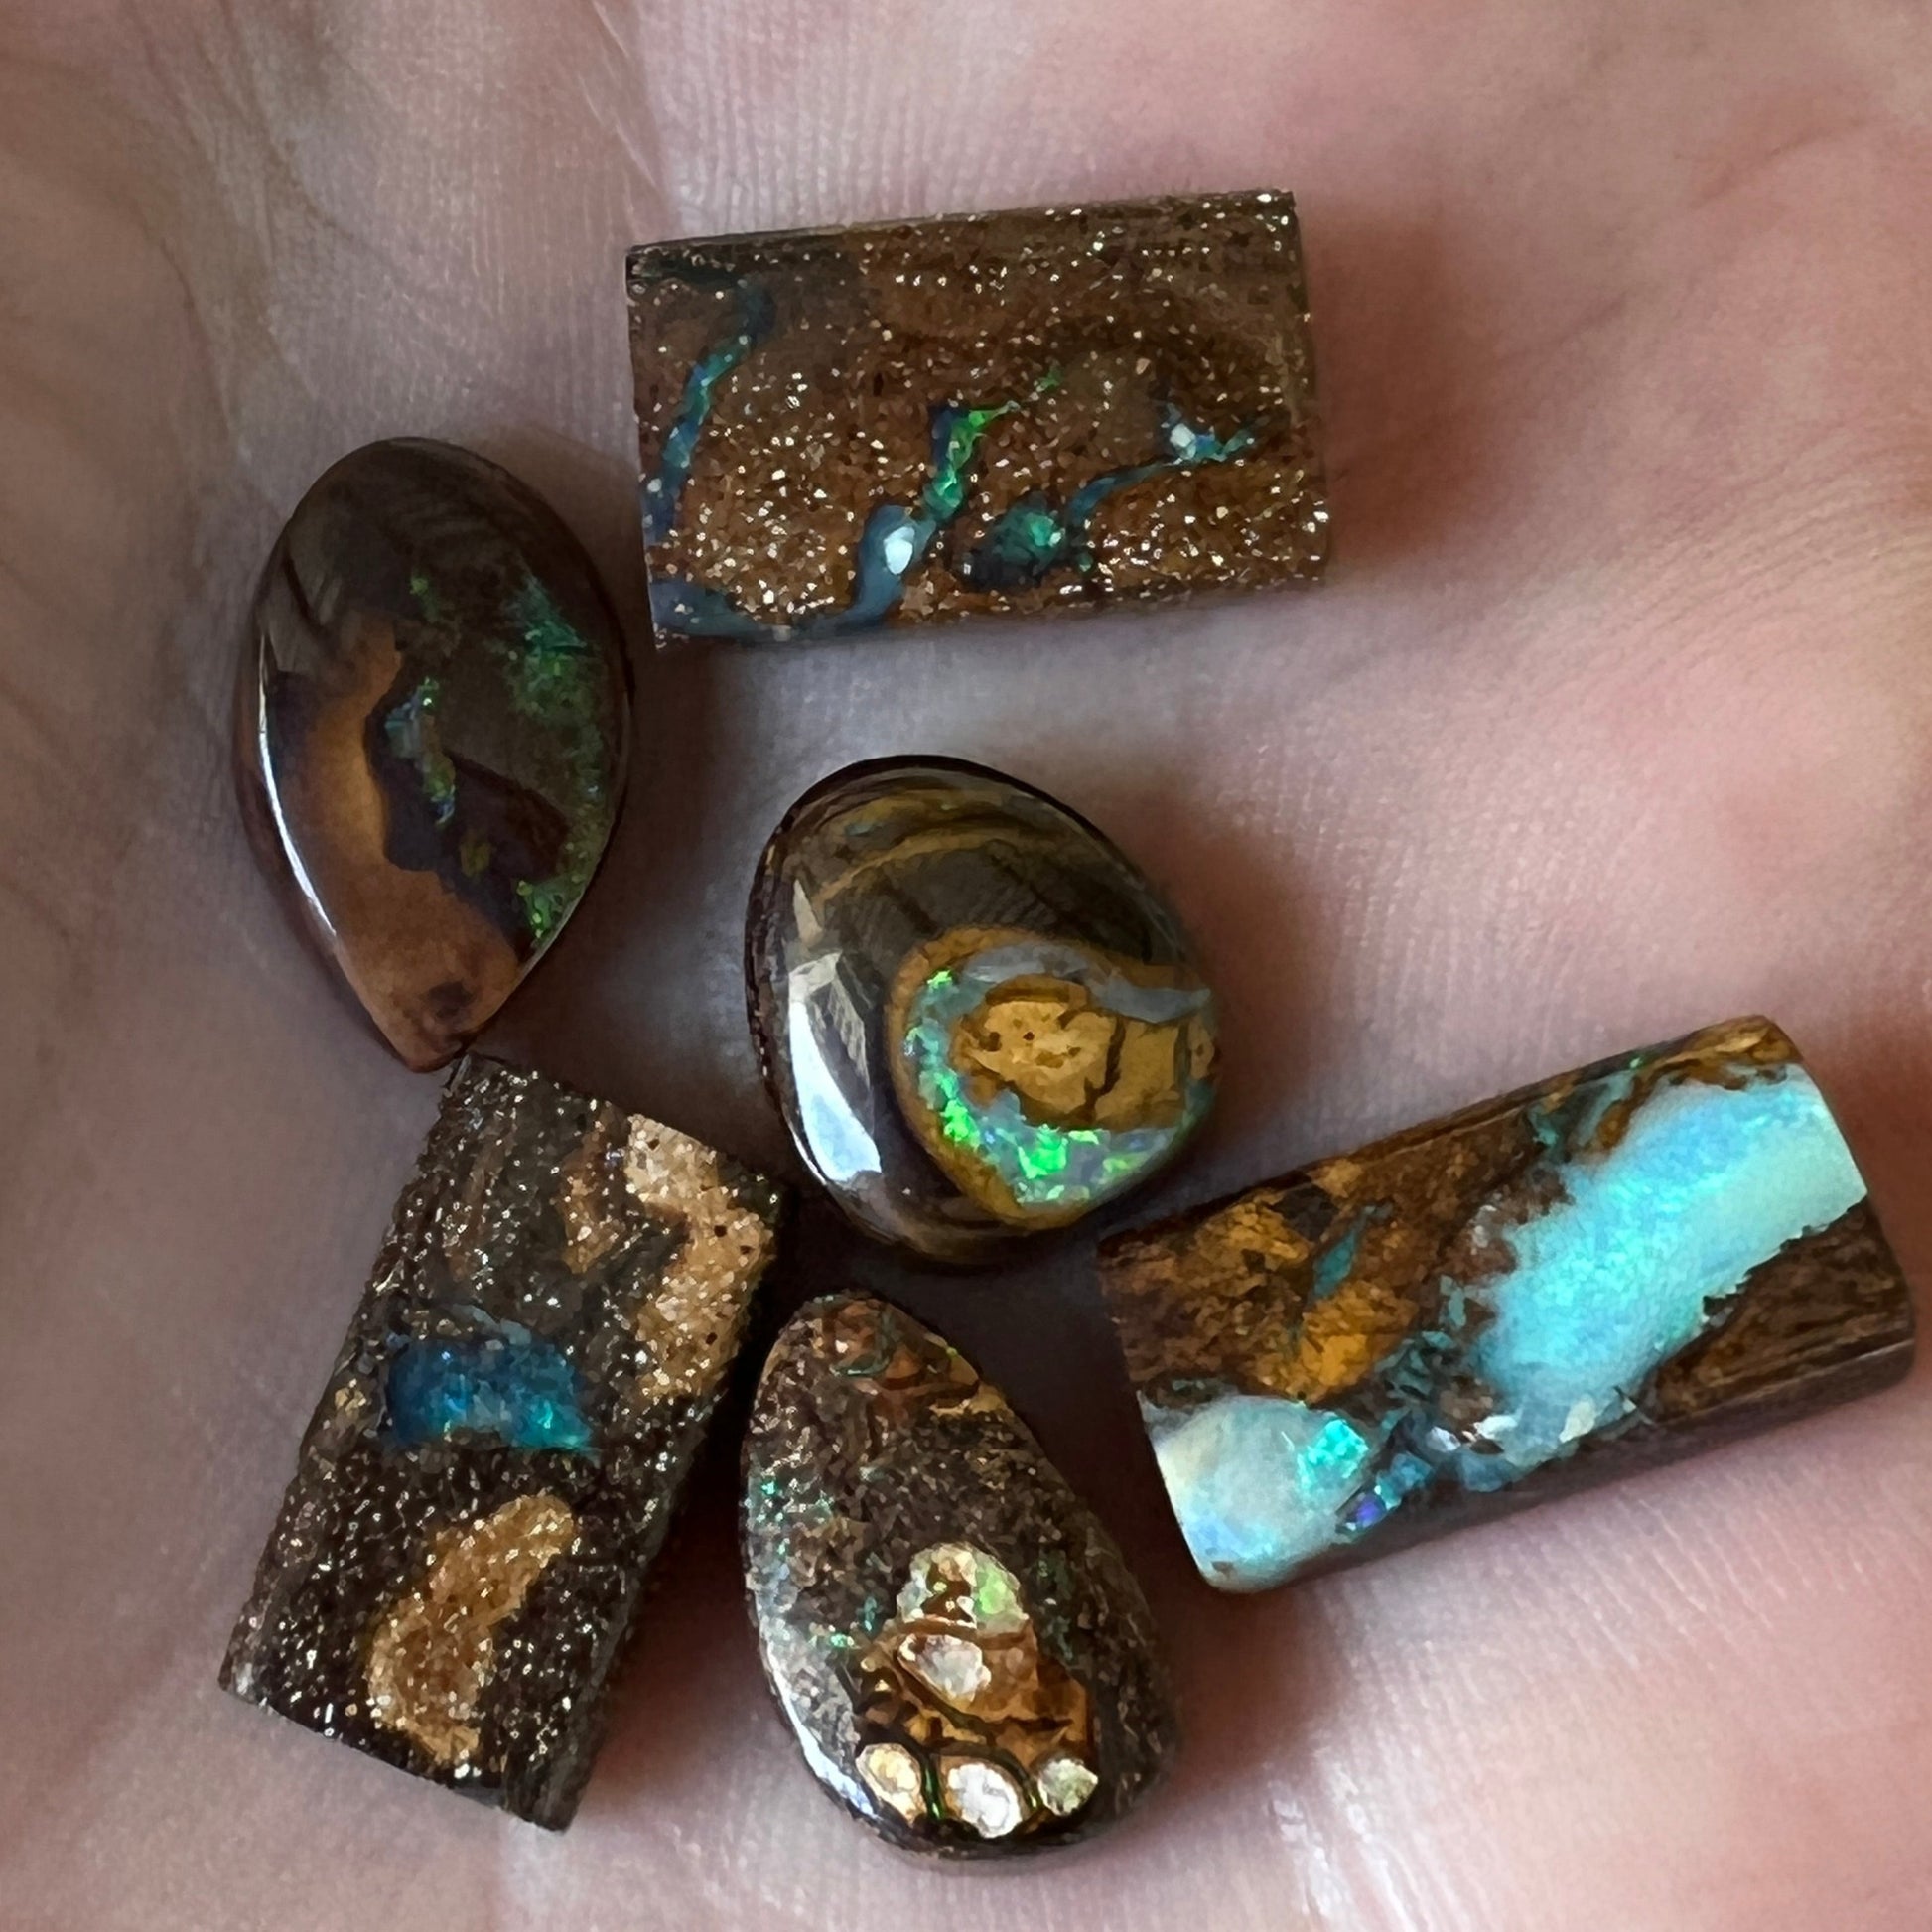 Beautiful boulder opal bundle from Winton. Cut and polished, ready for setting.